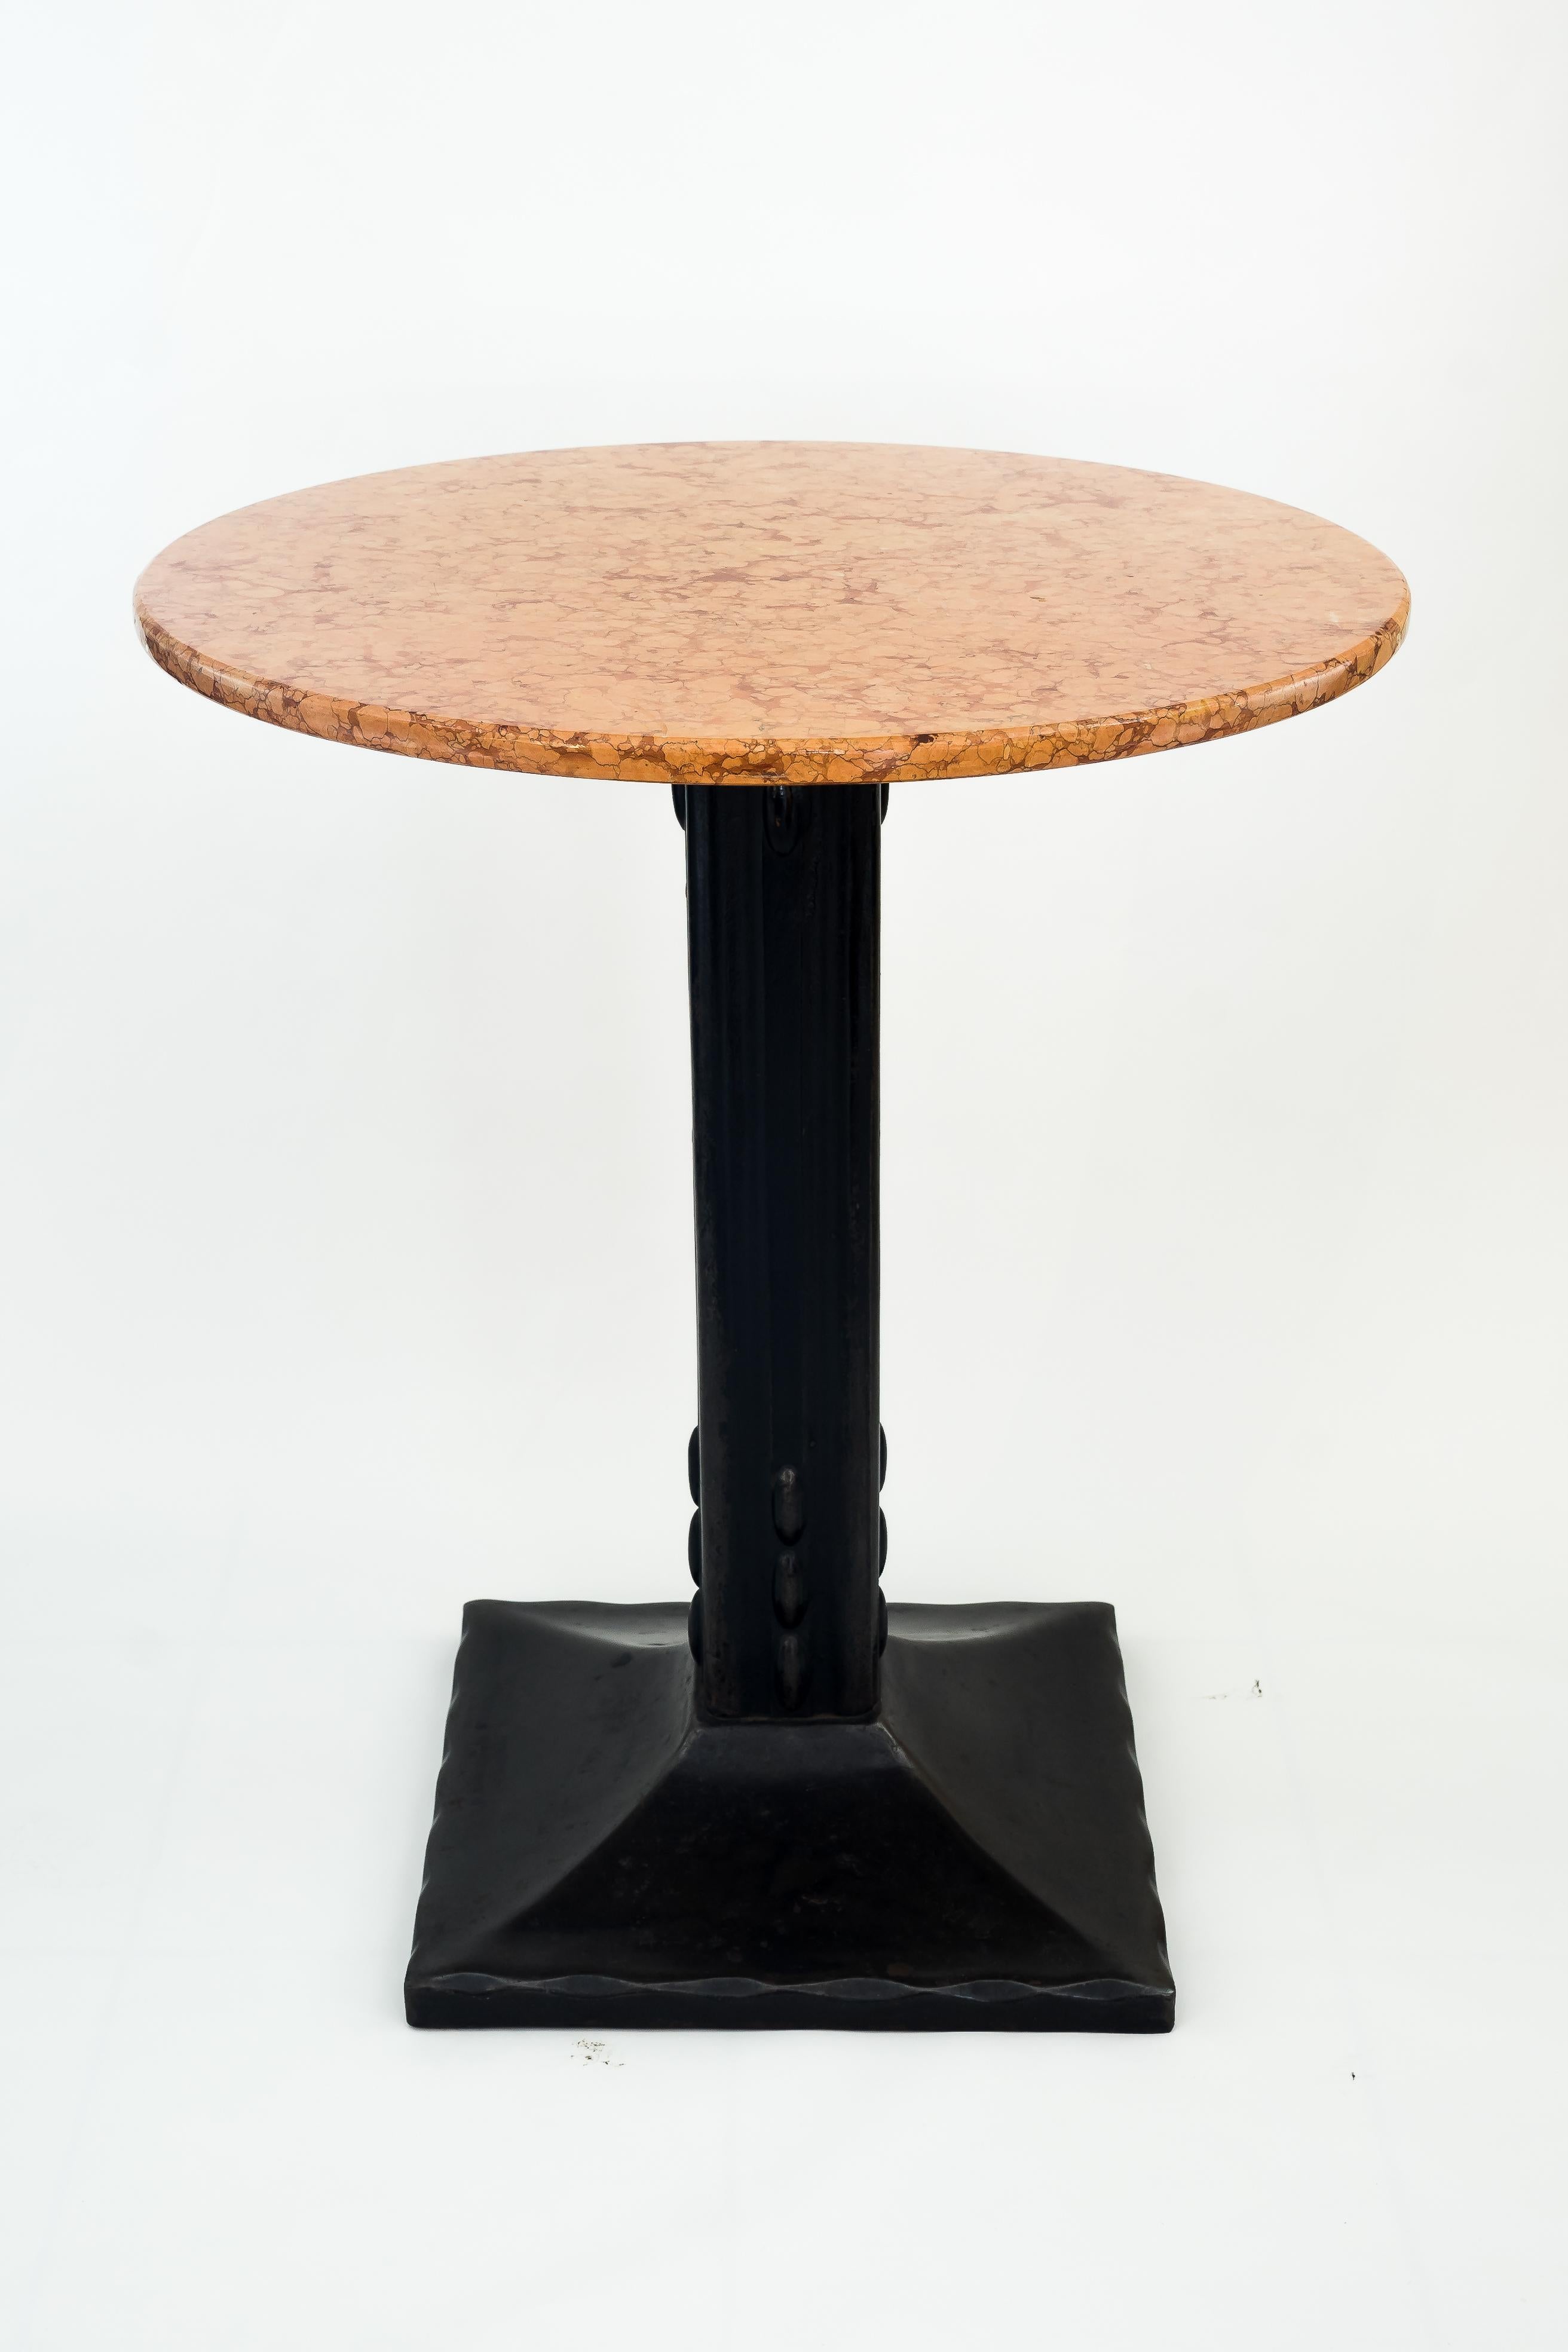 Art Deco coffee house table attr. to Josef Hoffmann
Marble top and iron base
Good original condition.